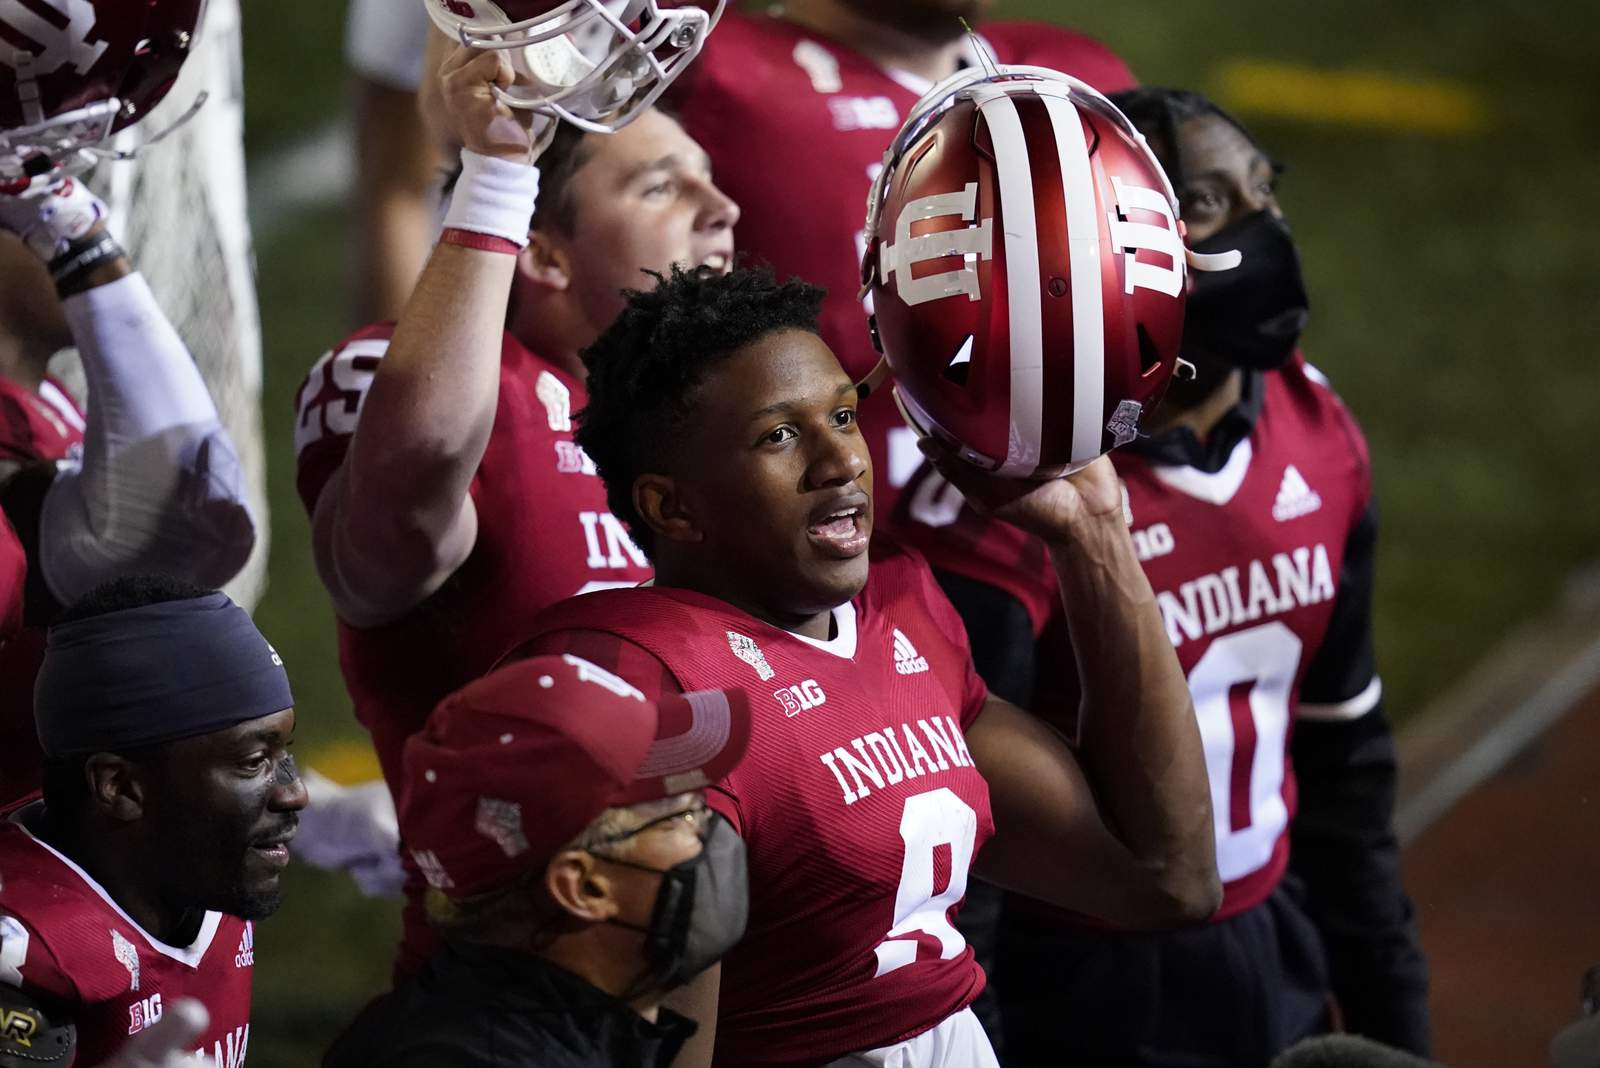 AP Top 25: Indiana jumps in at 17; Ohio State moves up to 3